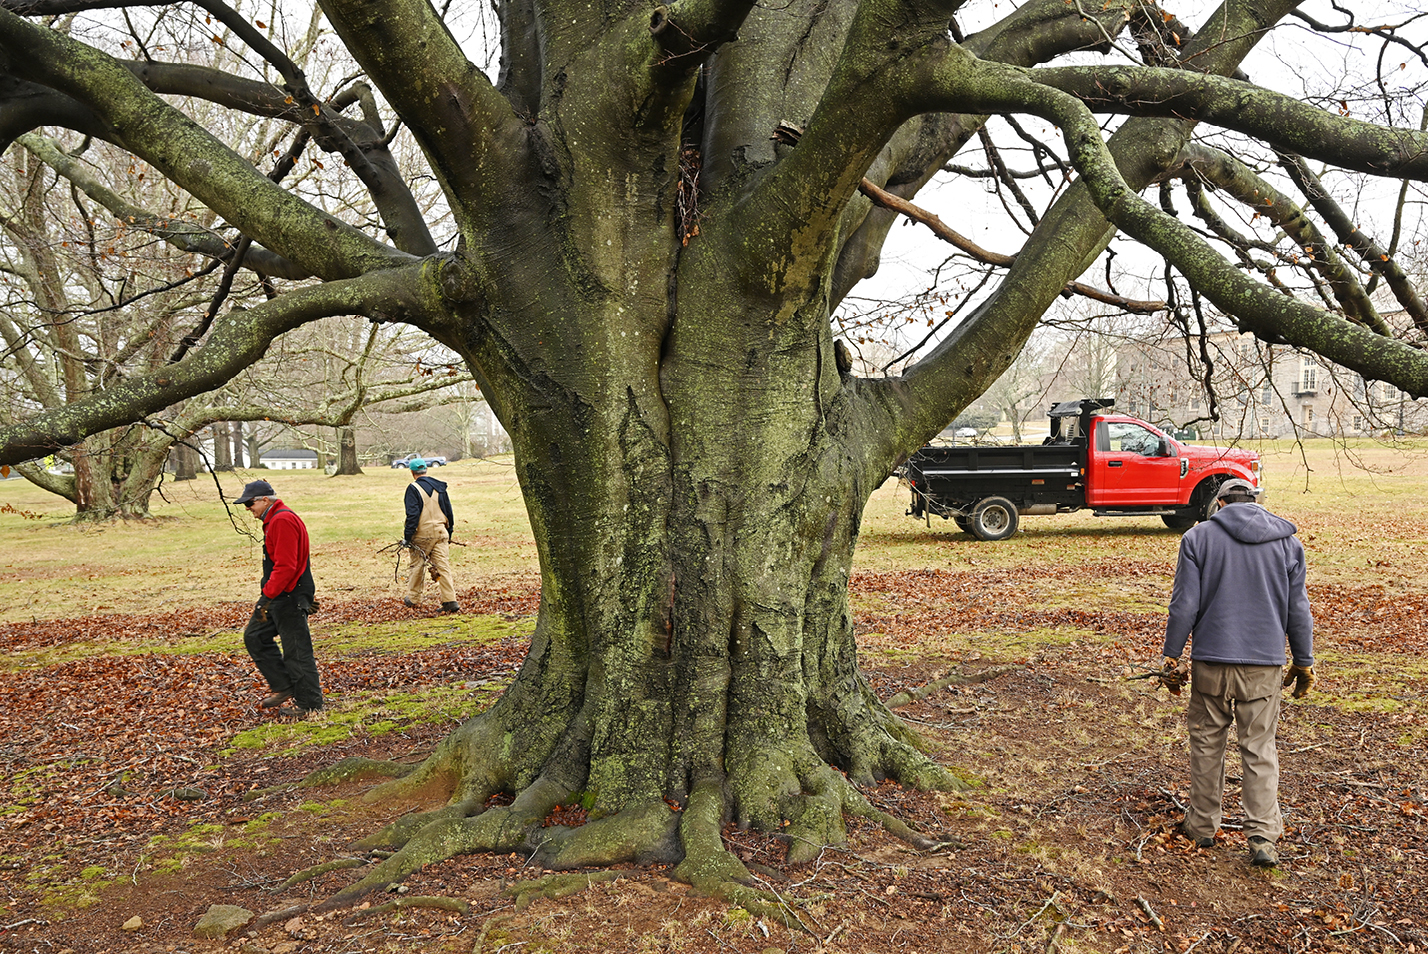 Connecticut College groundskeepers Tom Nazarko, Joe Serwinski and Kevin Marshall clean up fallen twigs and branches under a beech tree on Harkness Green.